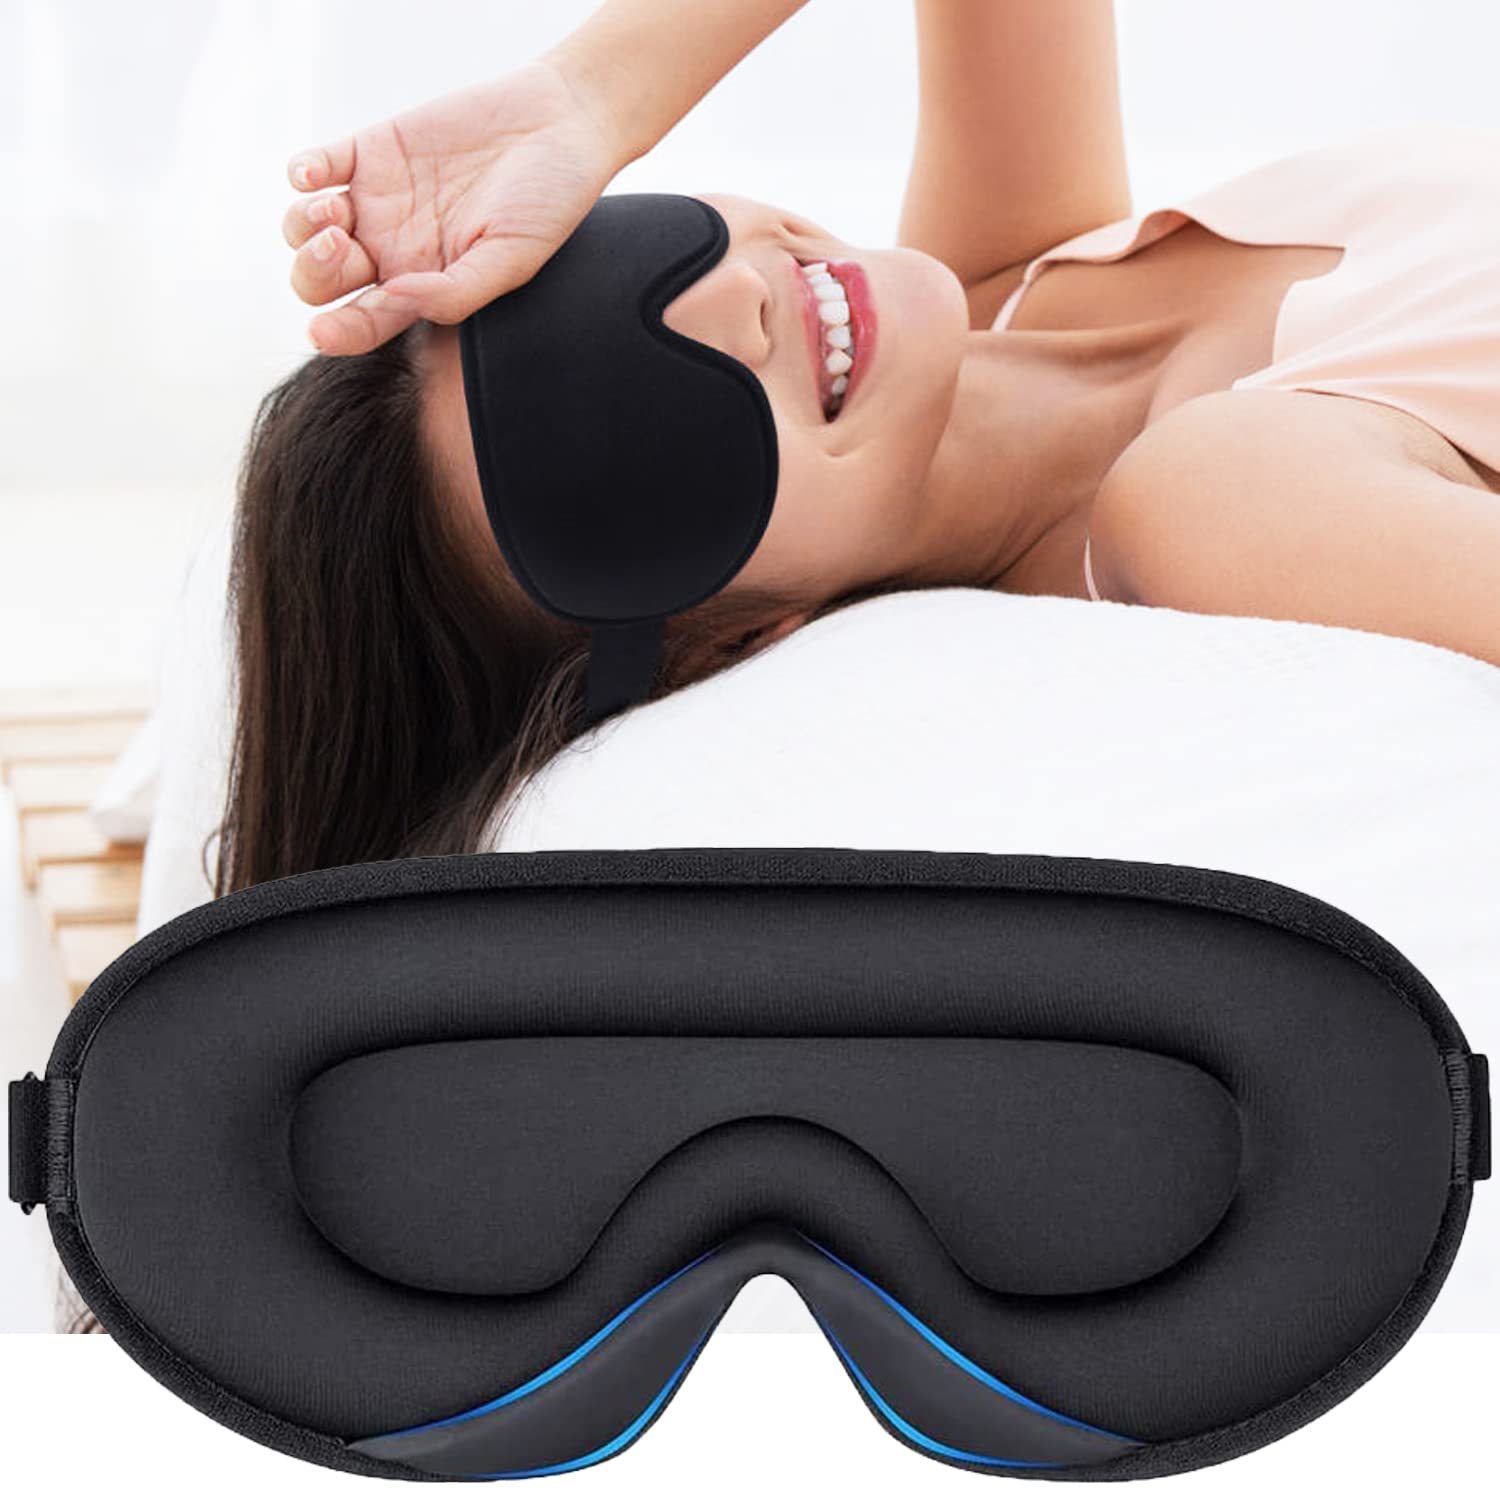 Dream Comfort 3D Sleep Mask: Total Blackout, Ultimate Relaxation